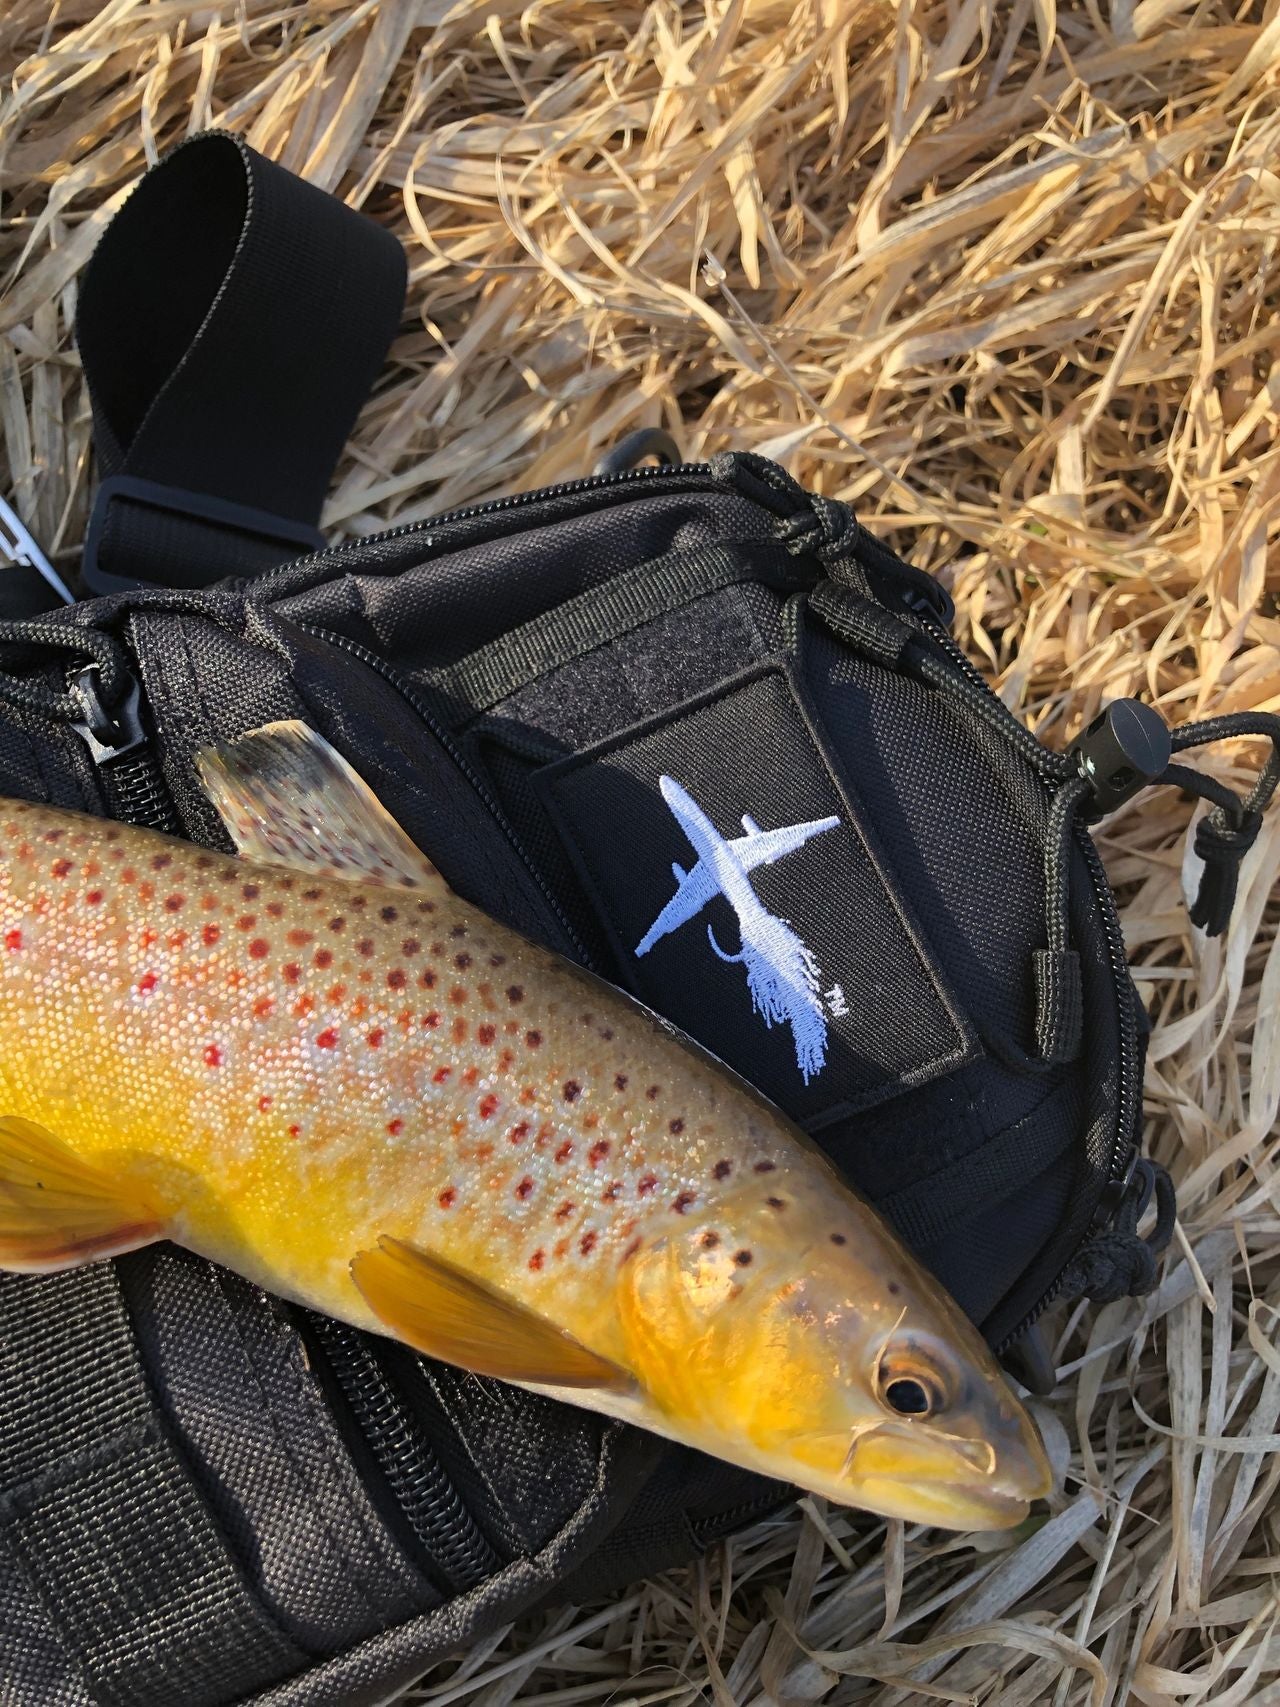 Minnesota Trout on the Fly During a January Business Trip